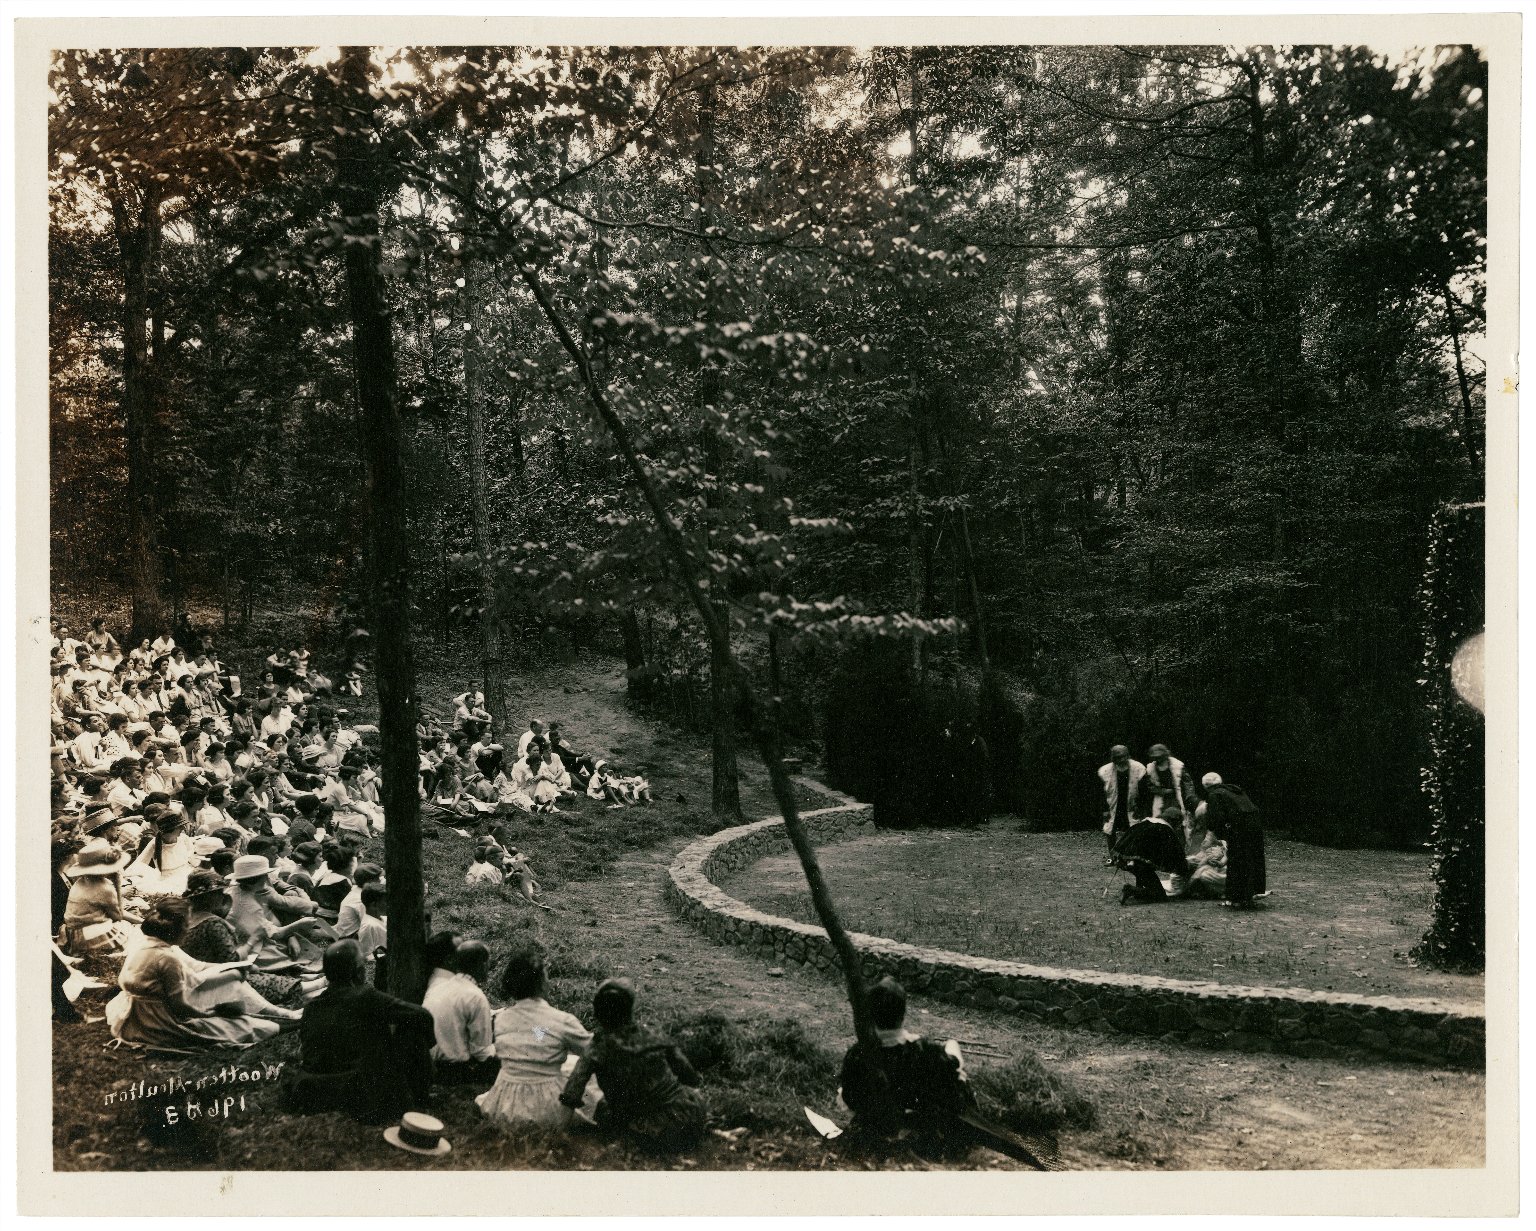 Productions of the Carolina Players of the University of North Carolina in the Forest Theatre, 1919-1943 (Folger Shakespeare Library).